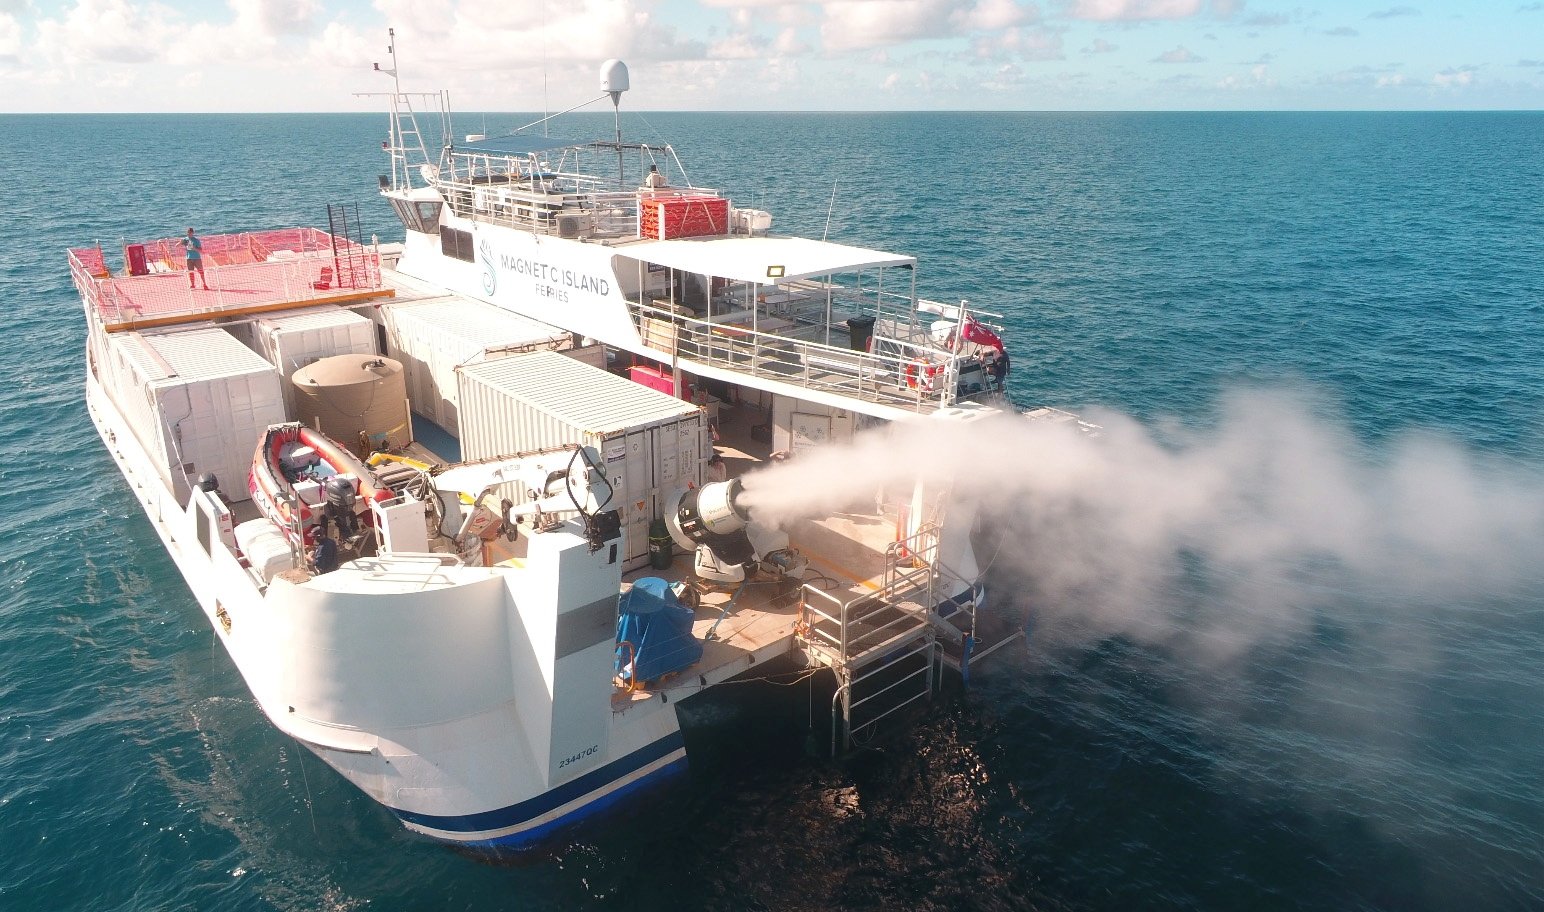 Plume from sprayer jets on a vessel is seen during the second field trial at Broadhurst Reef on the Great Barrier Reef, Queensland, Australia, March, 2021. (Southern Cross University via Reuters)